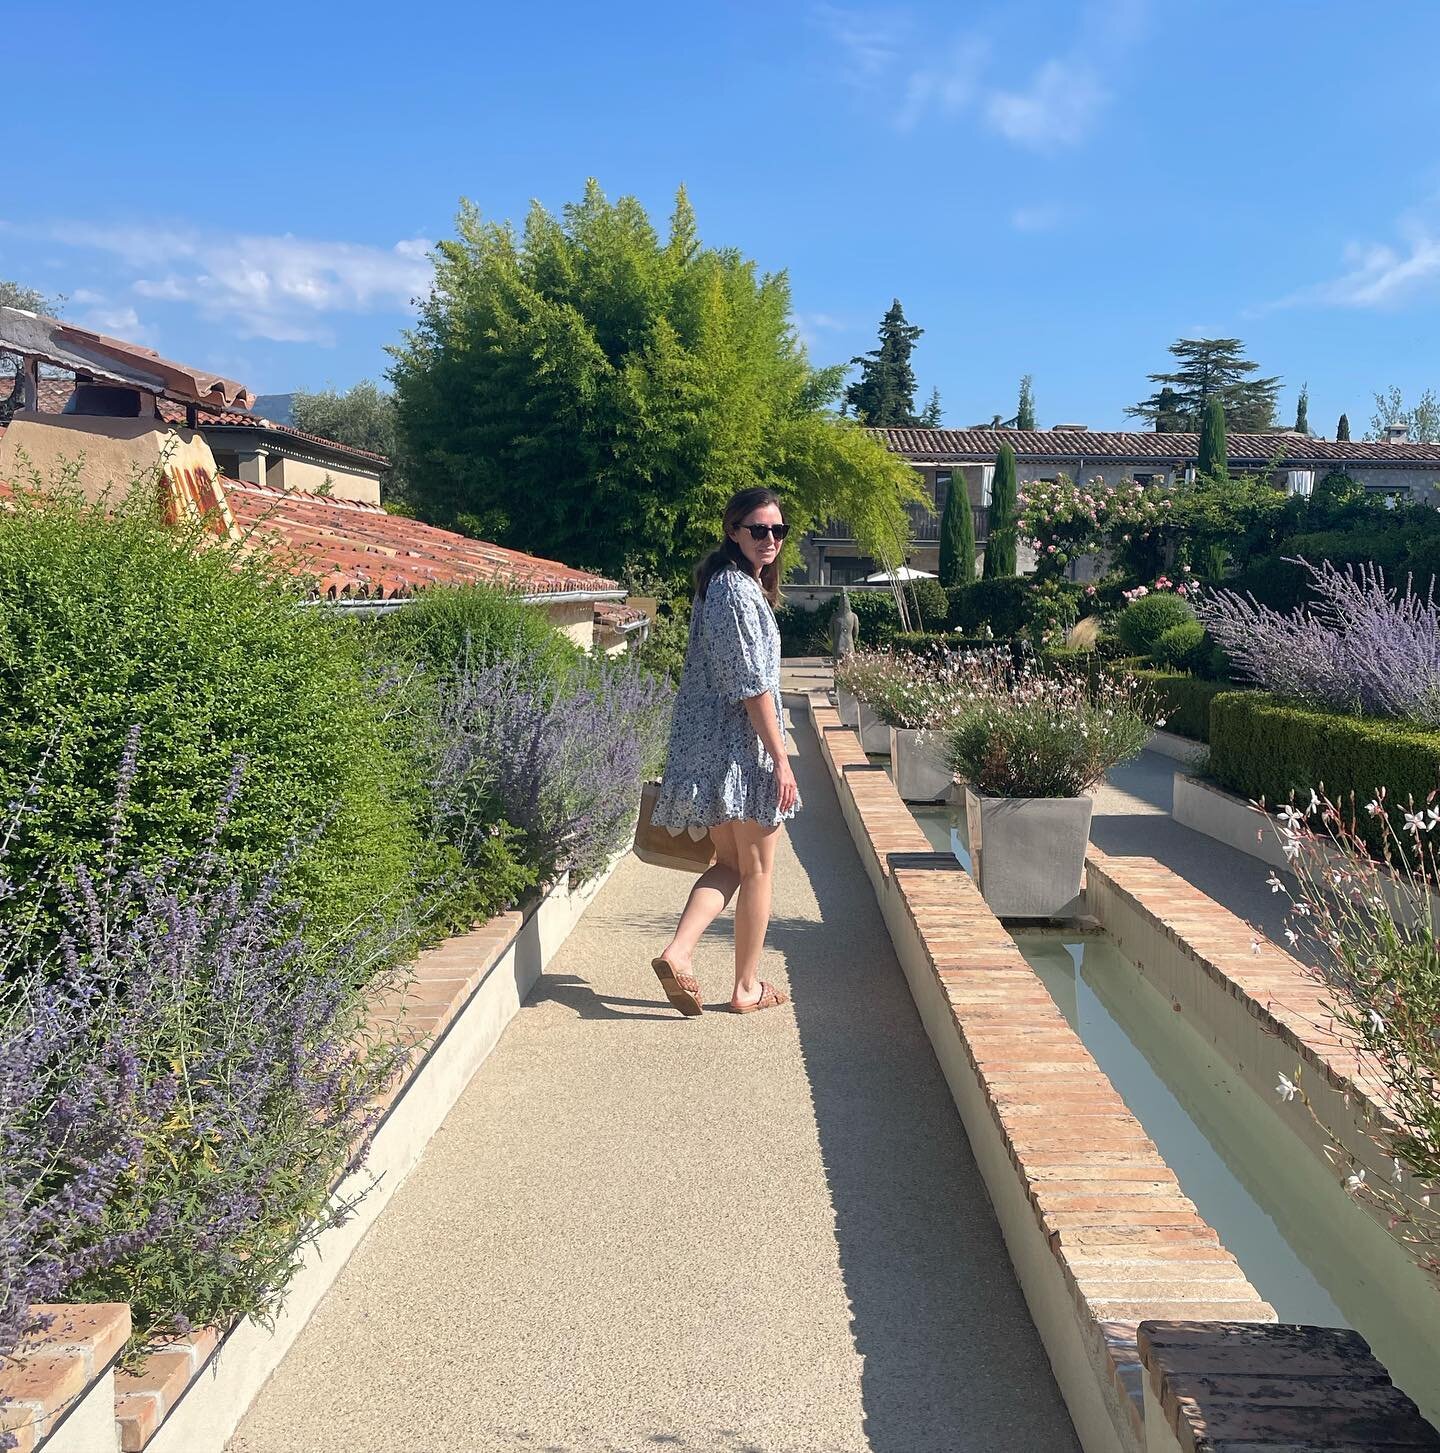 This time last year I was on my honeymoon in the south of France in literal bliss. My husband booked a beautiful hotel that I still reference as my happy place. After the stress of wedding planning and being really frustrated with my corporate job, I